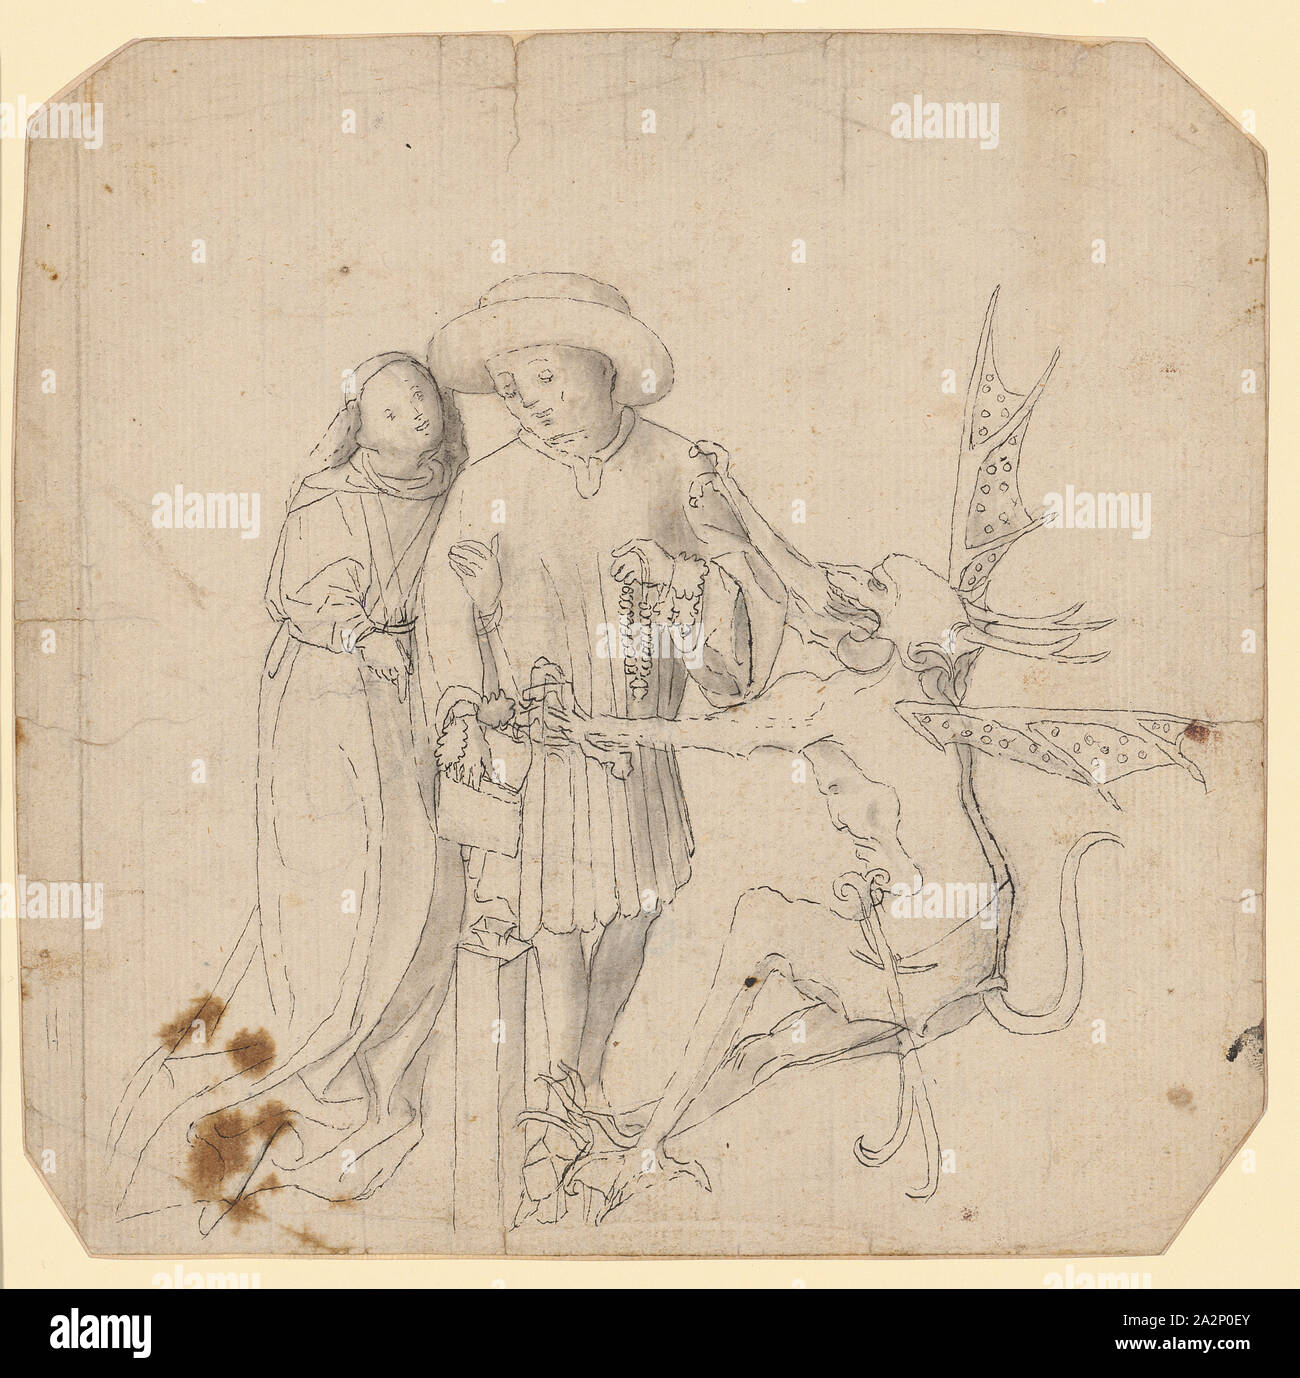 Dispenser at the sacrificial floor, standing between angel and devil (after Konrad Witz?), C. 1440/50, pen in black, gray wash, traces of chalk drawing (?), Sheet: 21.4 x 21.9 cm, unsigned, Anonym, Schweiz (Basel?), um 1440/50 Stock Photo